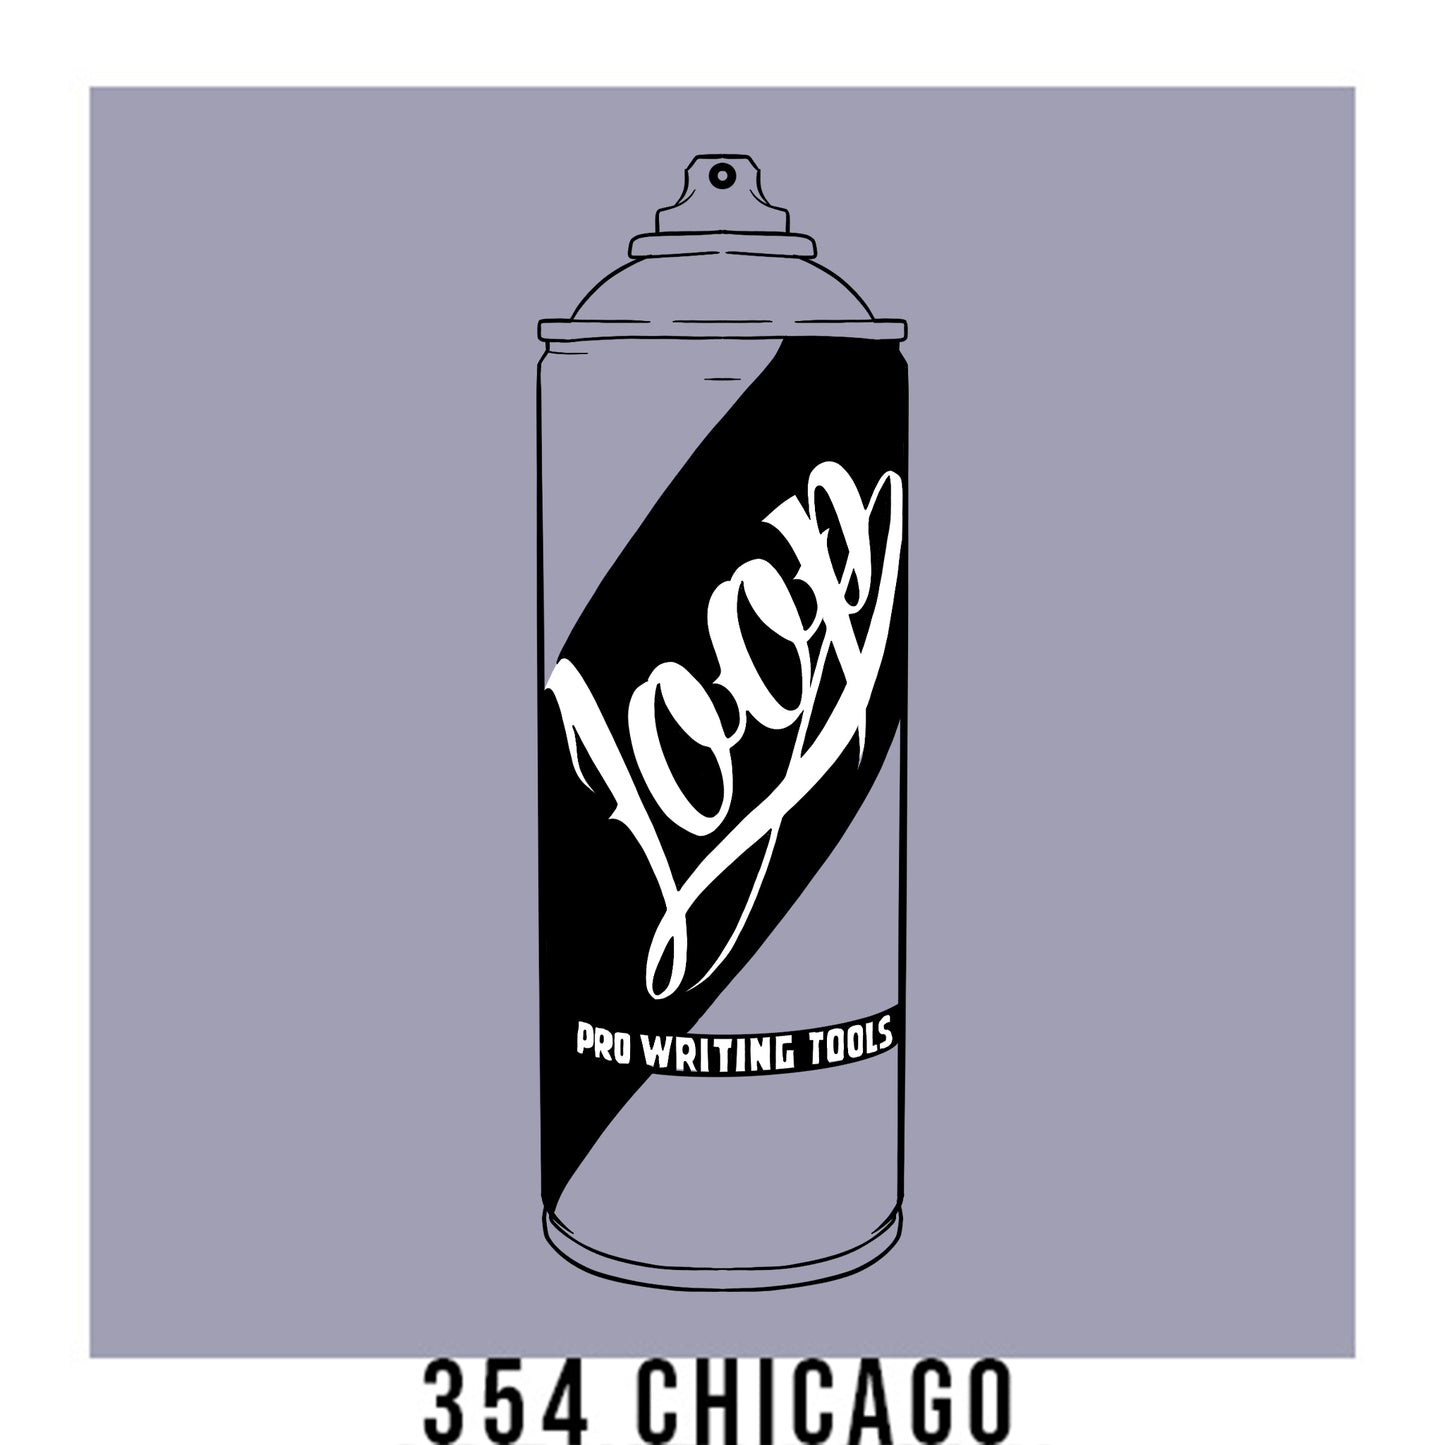 A black outline drawing of a pastel purple spray paint can with the word "Loop" written on the face in script. The background is a color swatch of the same pastel purple with a white border with the words "354 Chicago" at the bottom.